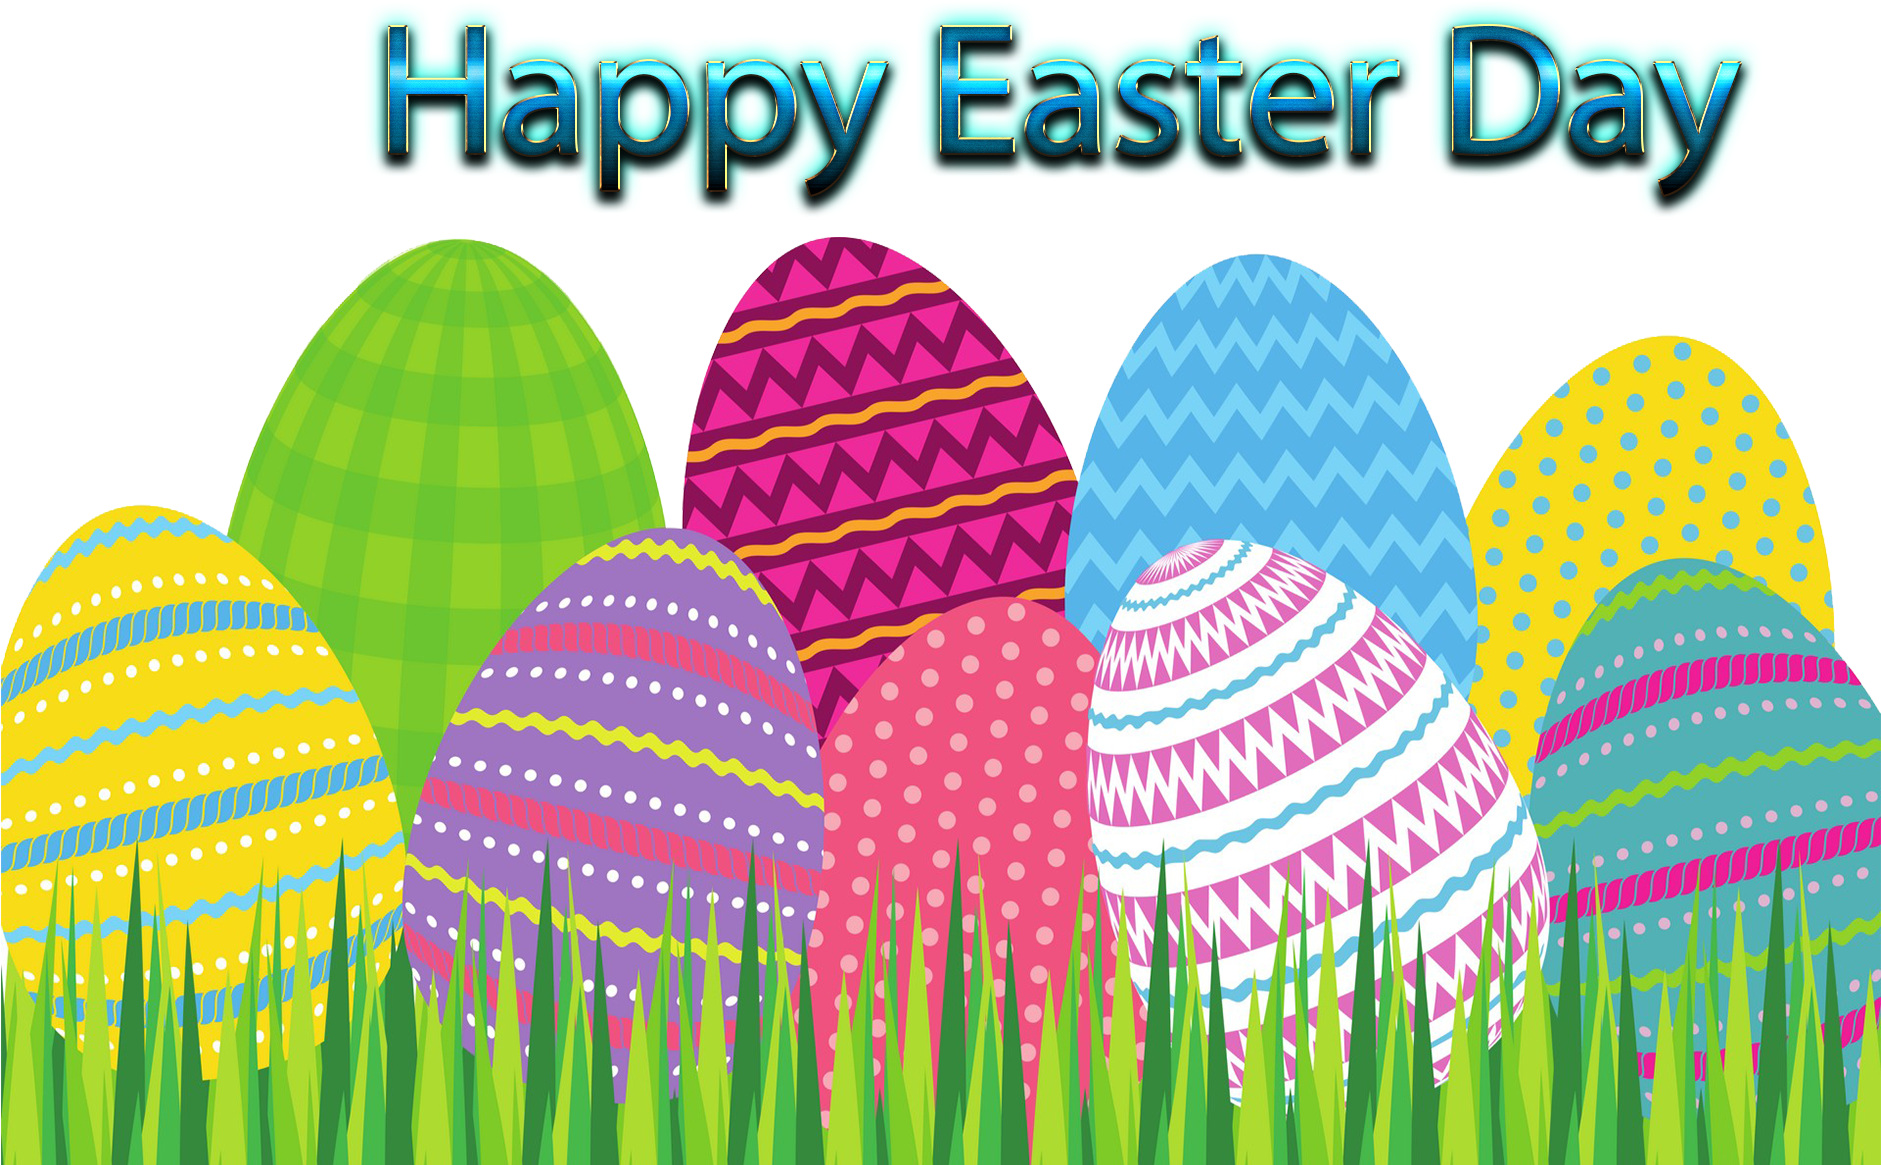 Colorful Easter Eggs Celebration PNG